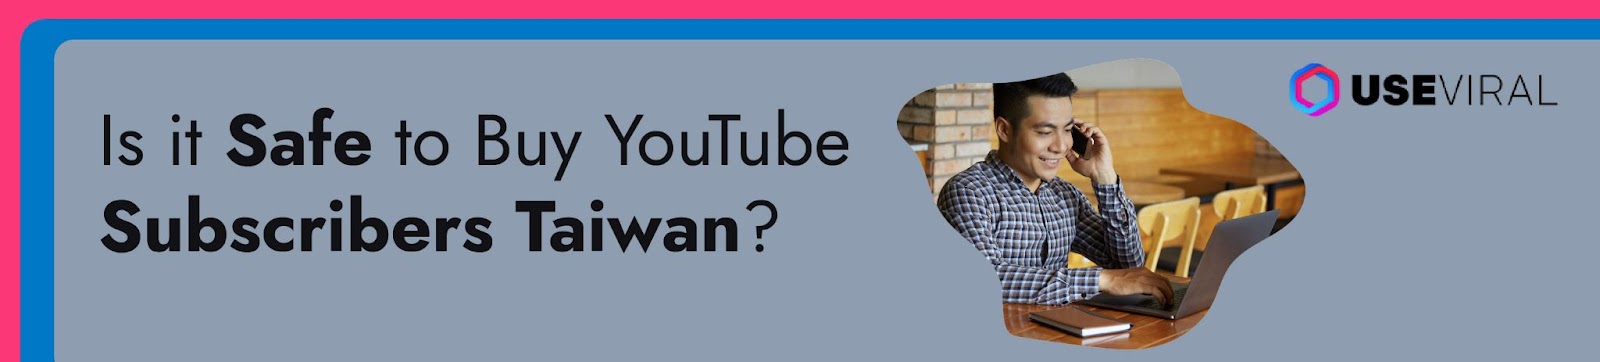 Is it safe to buy YouTube subscribers Taiwan?